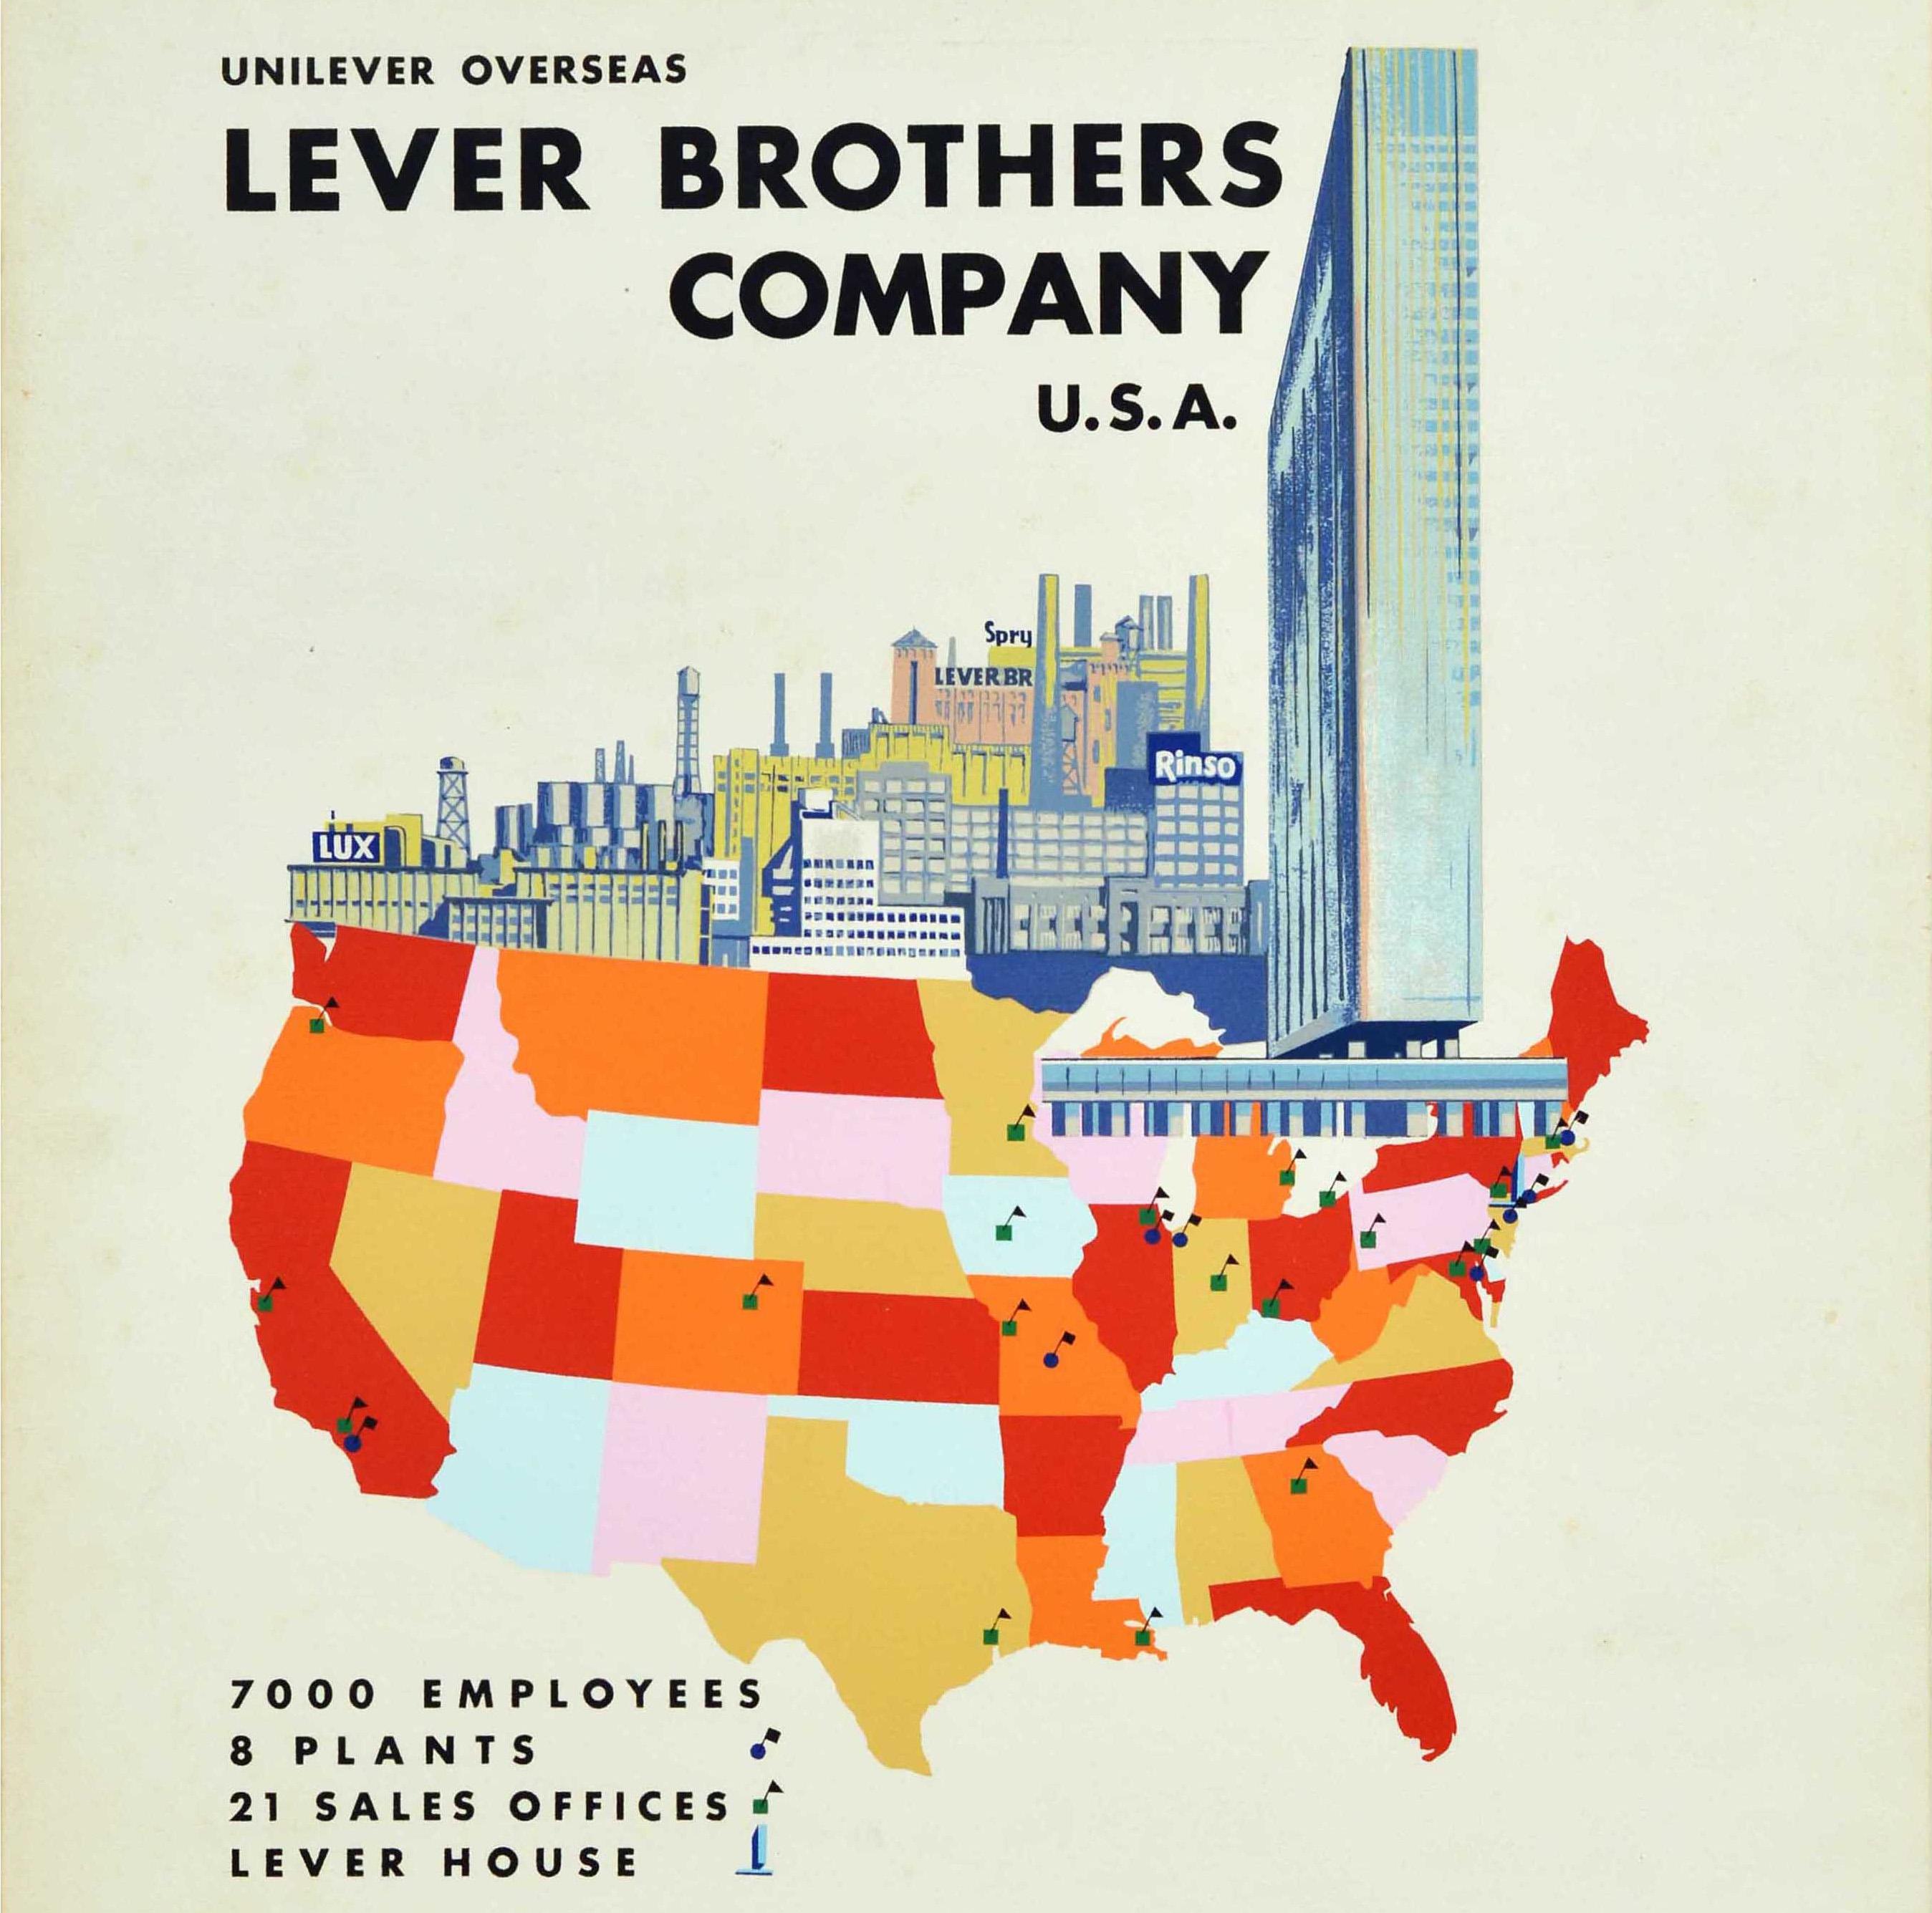 Original vintage advertising poster for Unilever Overseas Lever Brothers Company USA 7000 Employees 8 Plants 21 Sales Offices Lever House Serves 150 Million People. Colourful design showing flag pinpoints on a map of America with an image above of